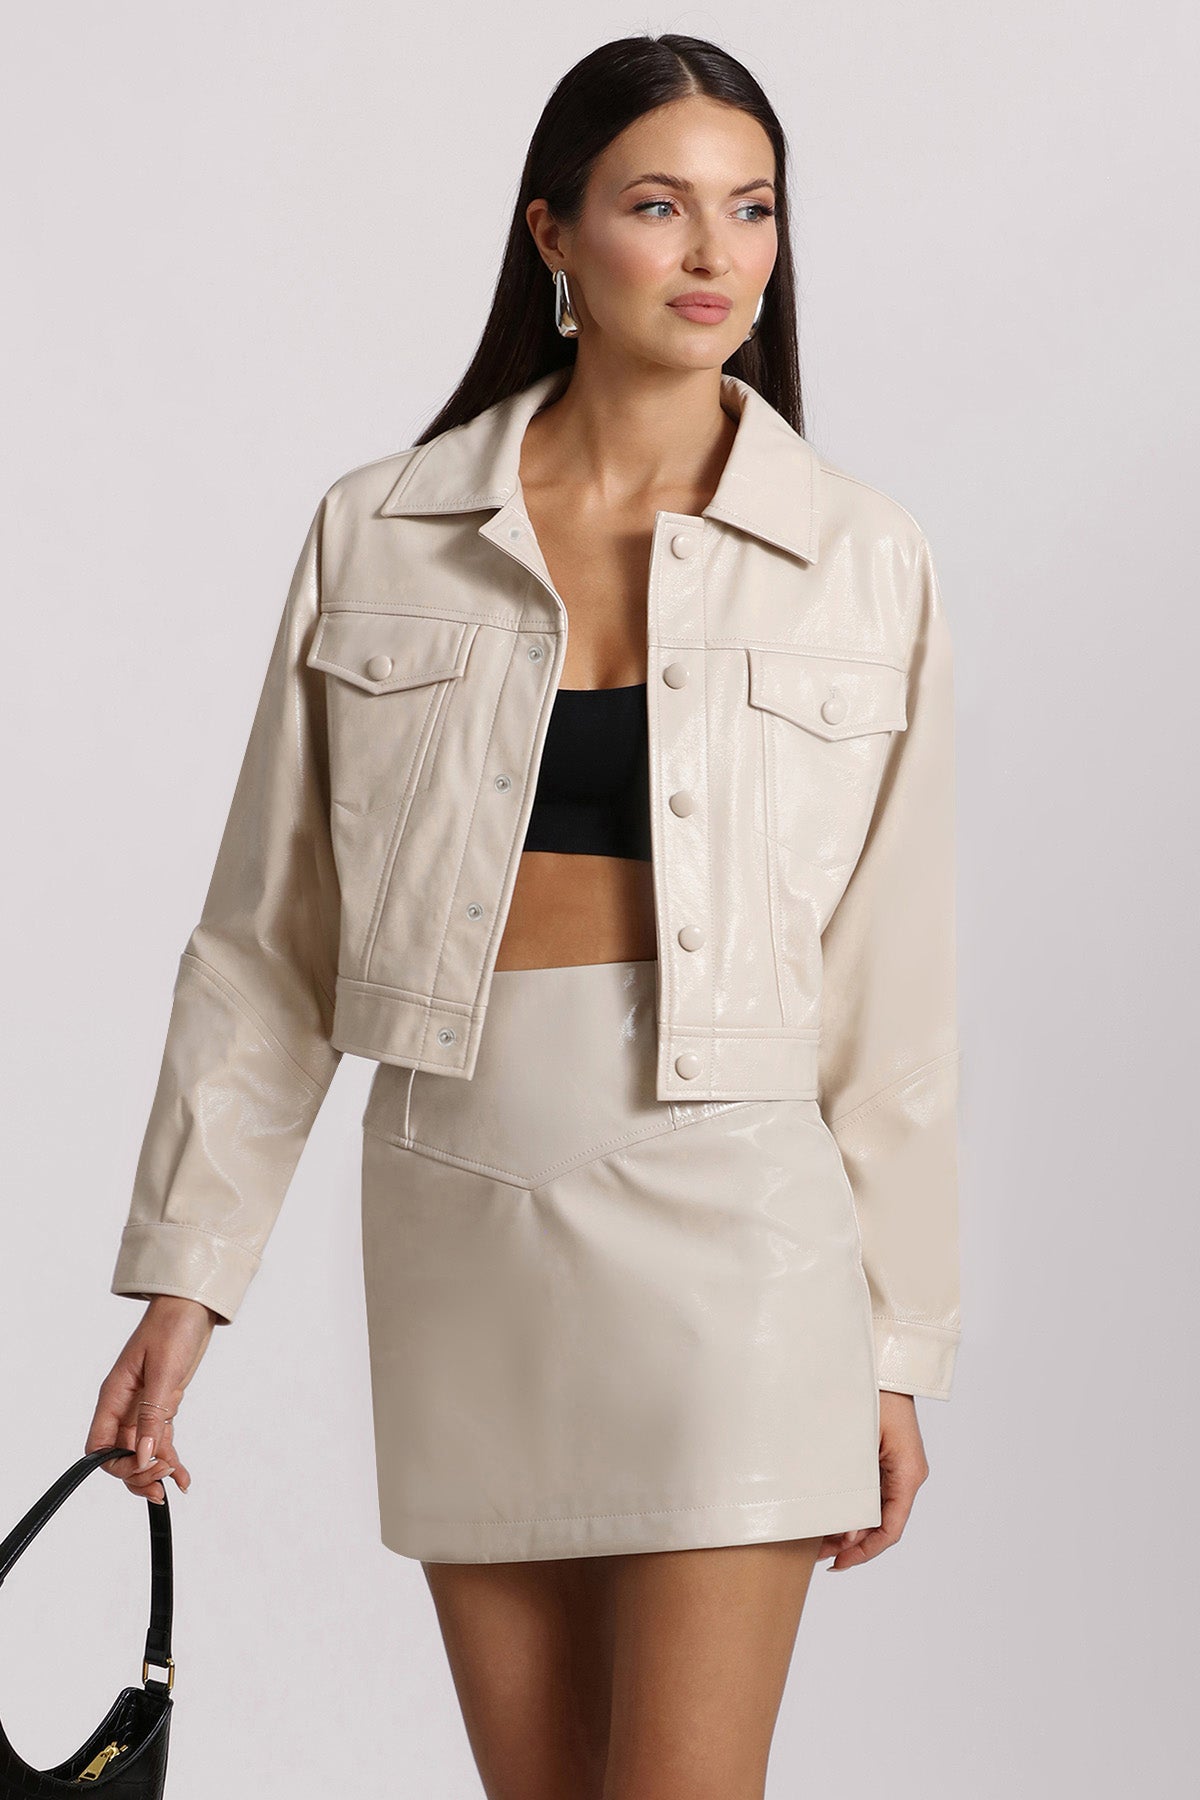 off white cream faux leather cropped trucker jacket - cute stylish jackets by Avec Les Filles